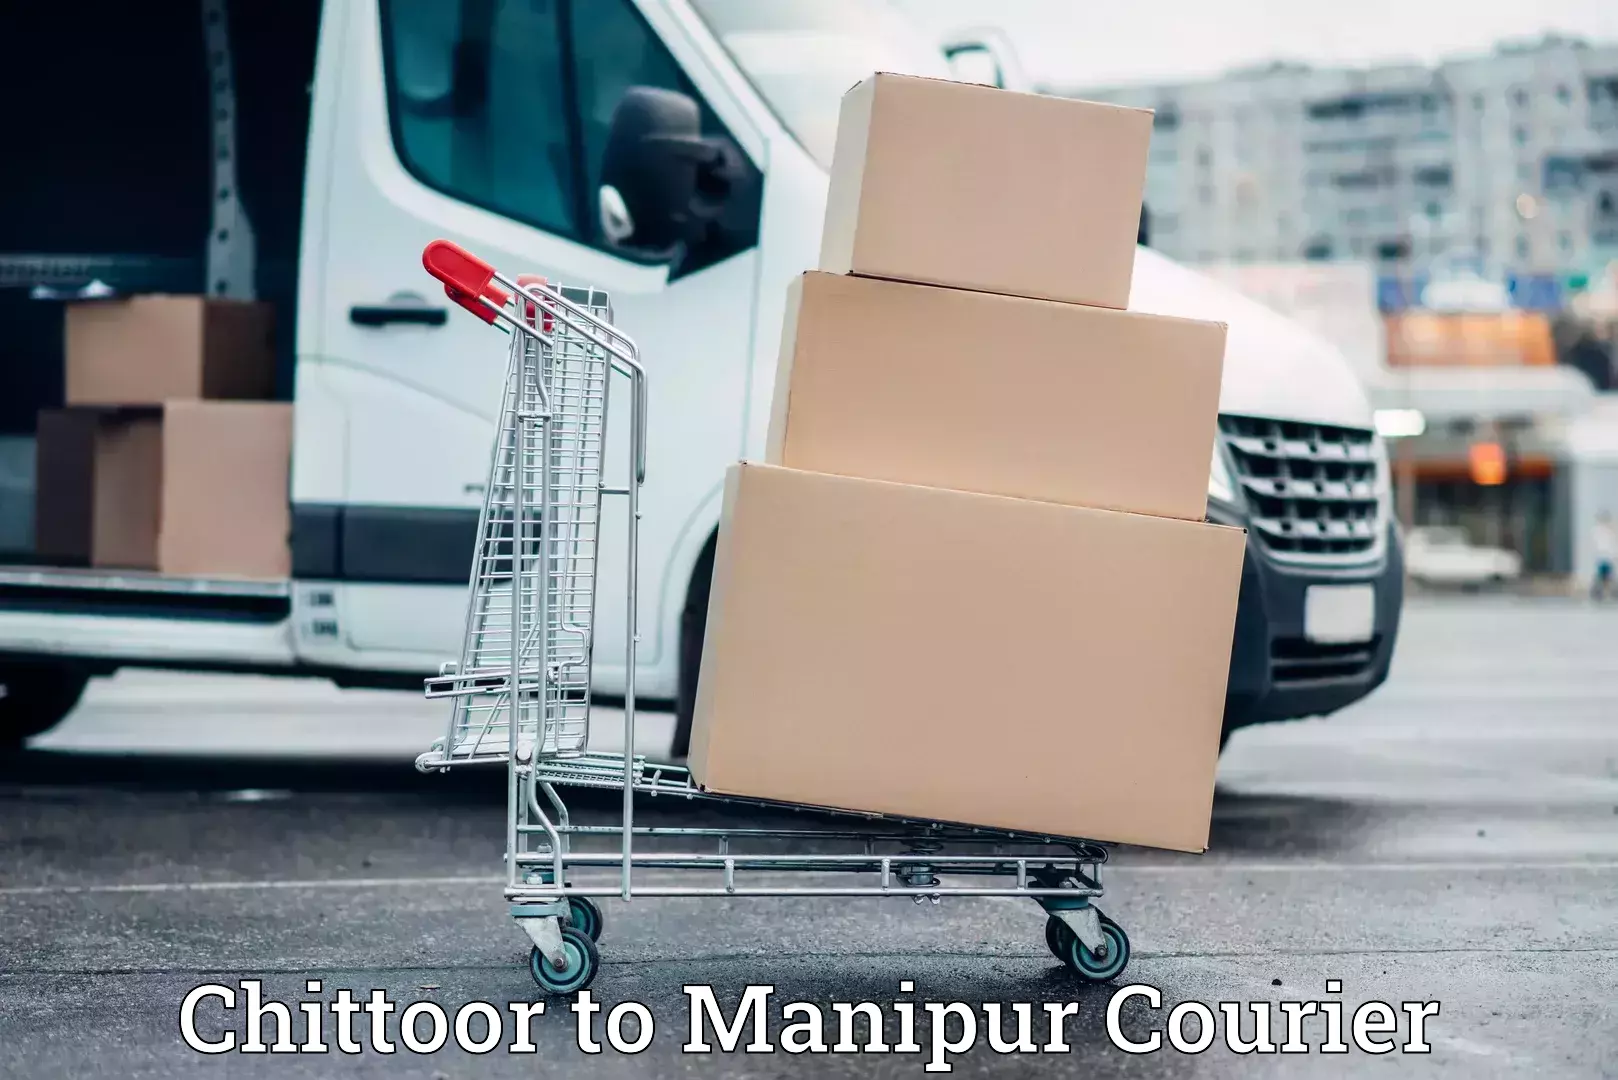 Furniture transport specialists Chittoor to Manipur